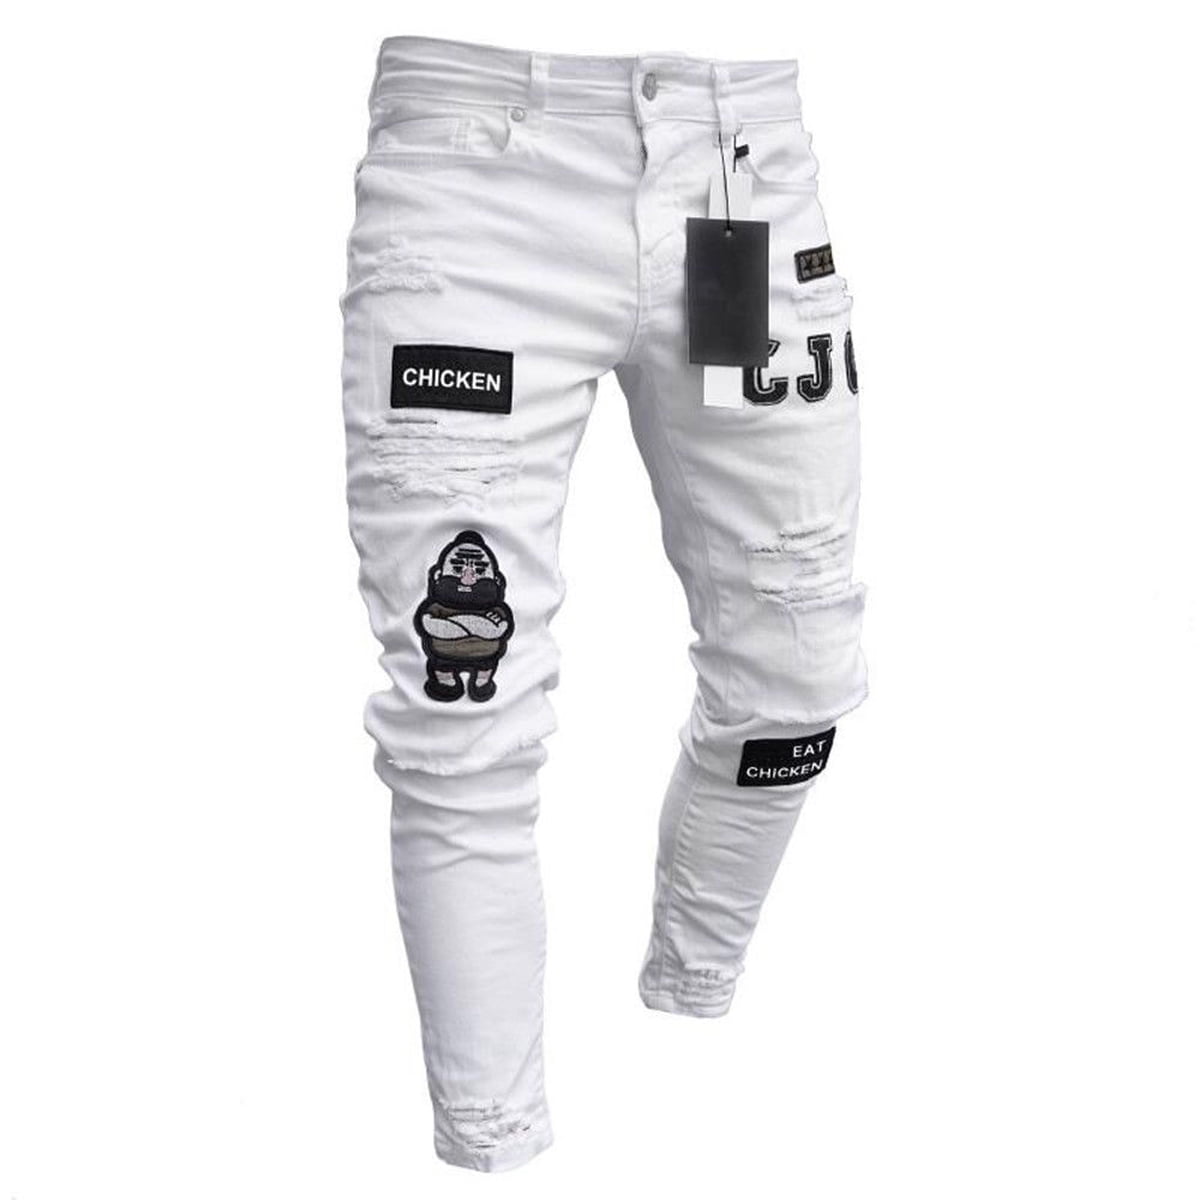 Romano nx Cotton Cargo Track Pant for Men Lower with MultiPockets  Side  Zipper Pockets